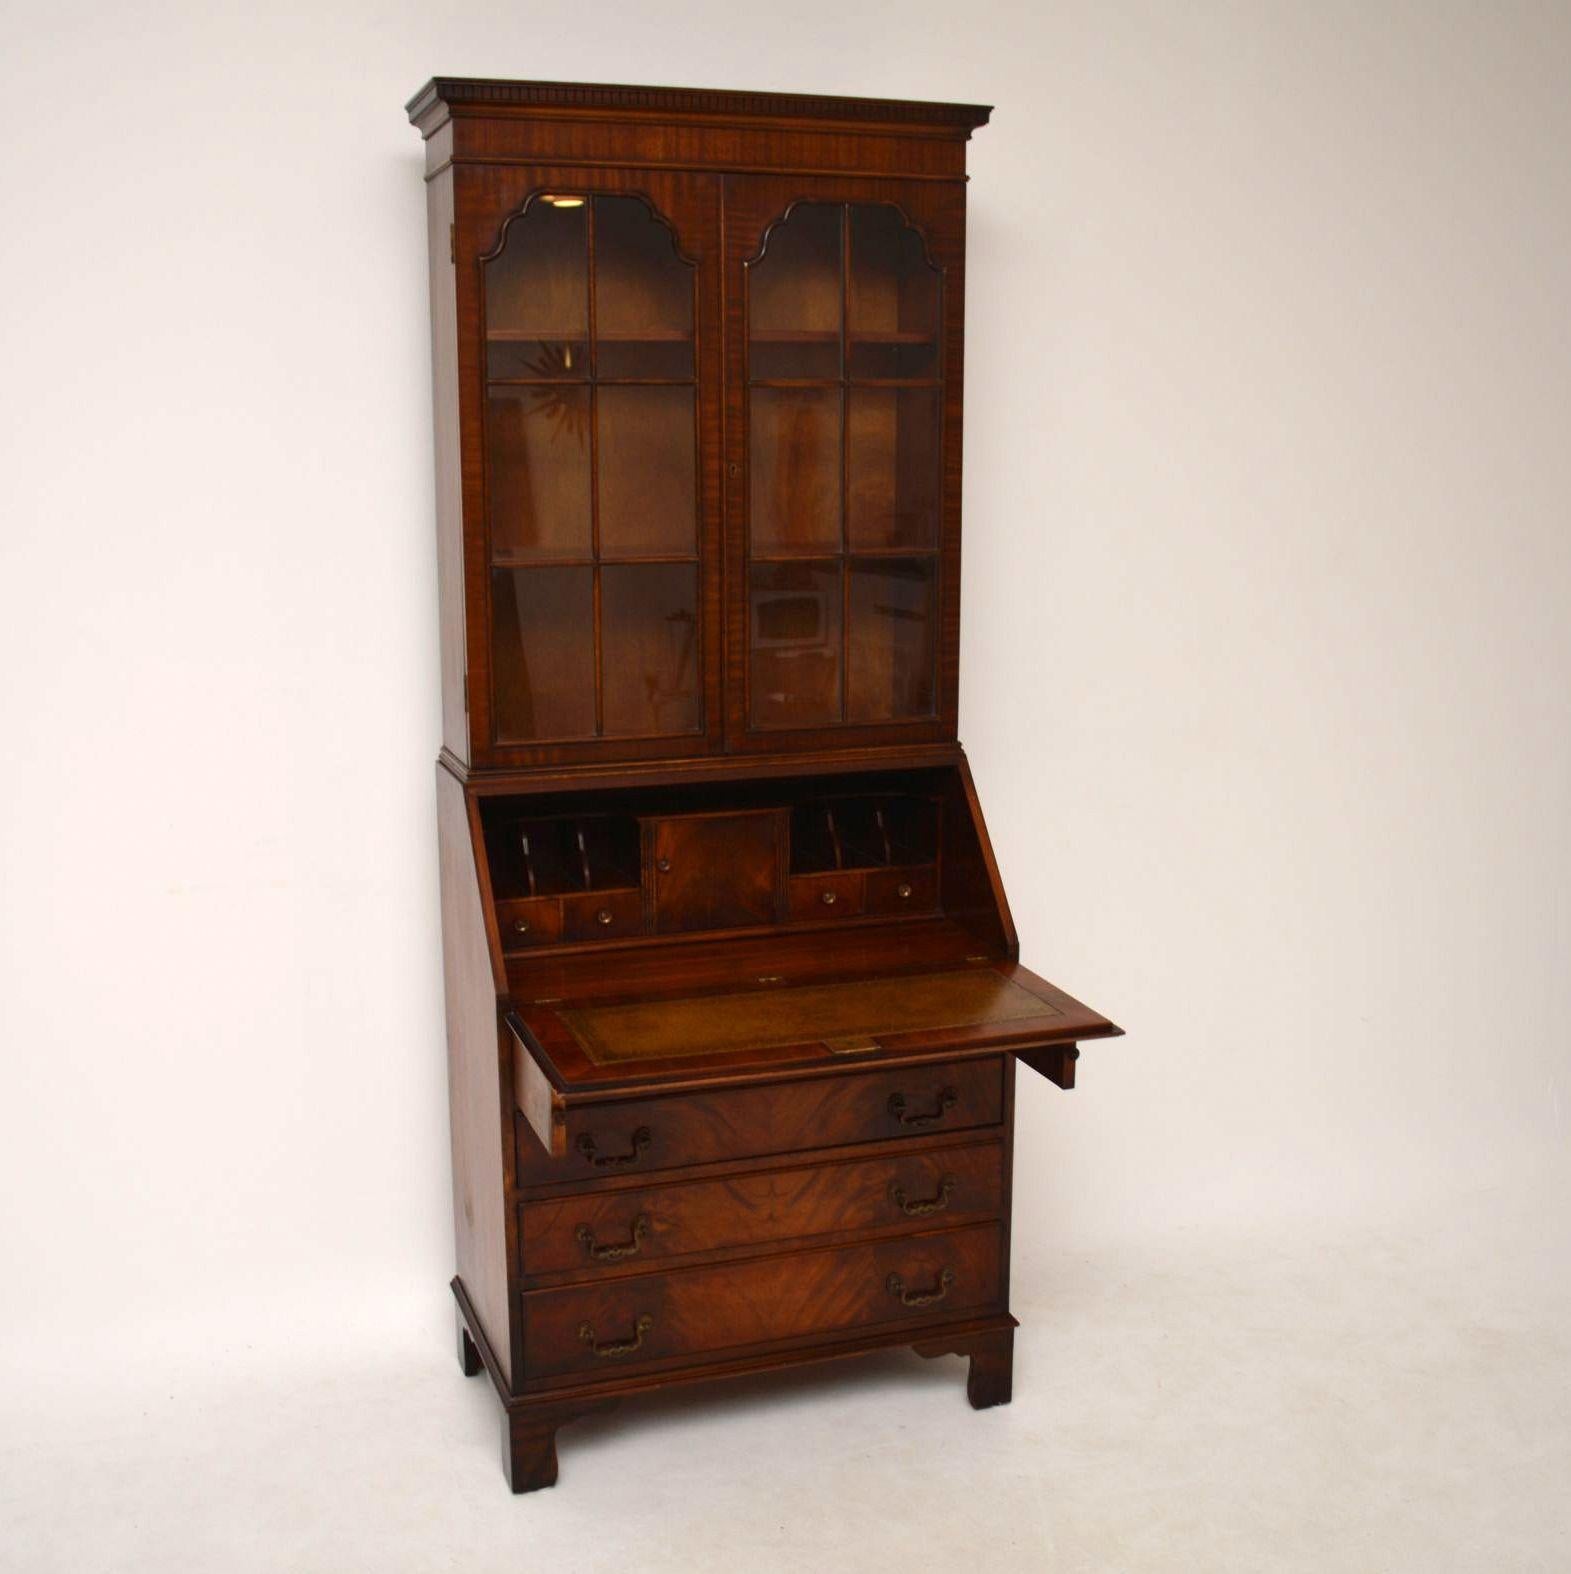 Antique Georgian style mahogany bureau bookcase in excellent condition & dating from around the 1950’s period. It has double arched astral-glazed doors, with adjustable bookshelves inside. The writing section has a fine array of small drawers, a